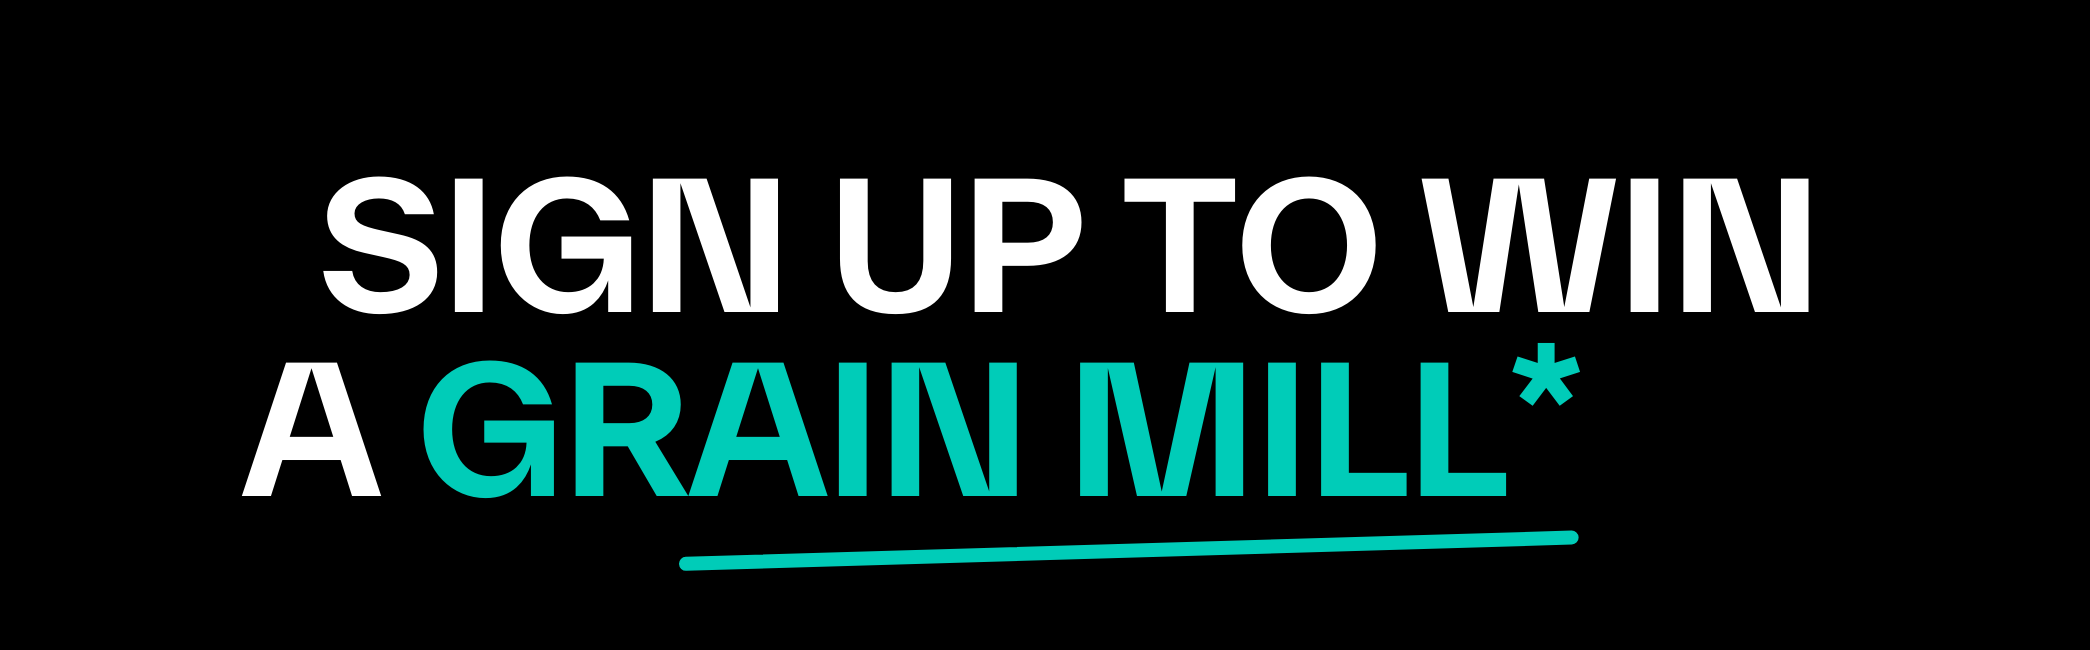 SIGN UP TO WIN A GRAIN MILL